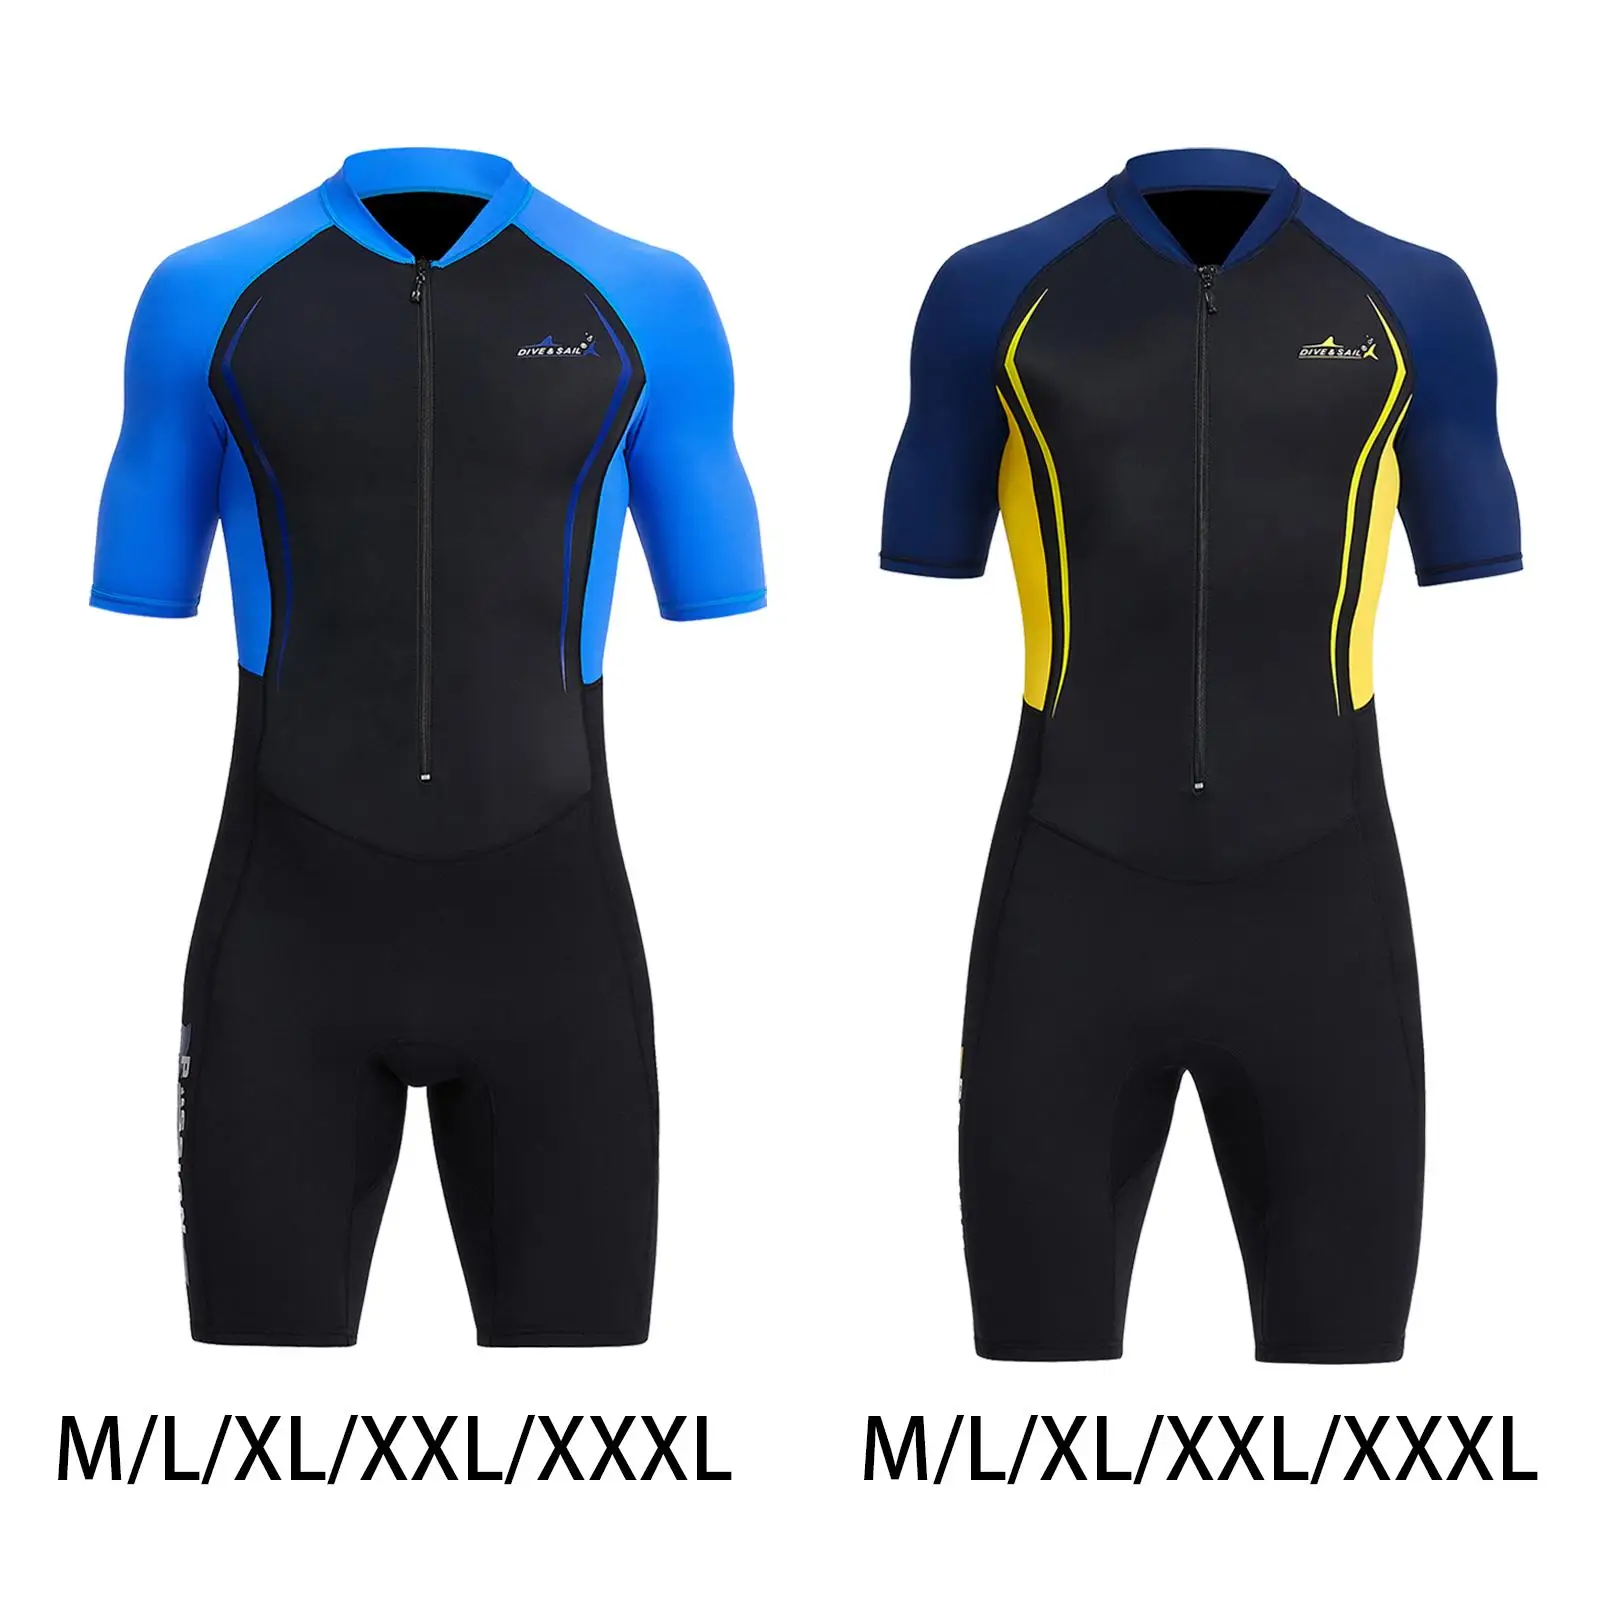 Mens Shorty Wetsuit One Piece Front Zip 1.5mm Sunproof Diving Suit for Swimming